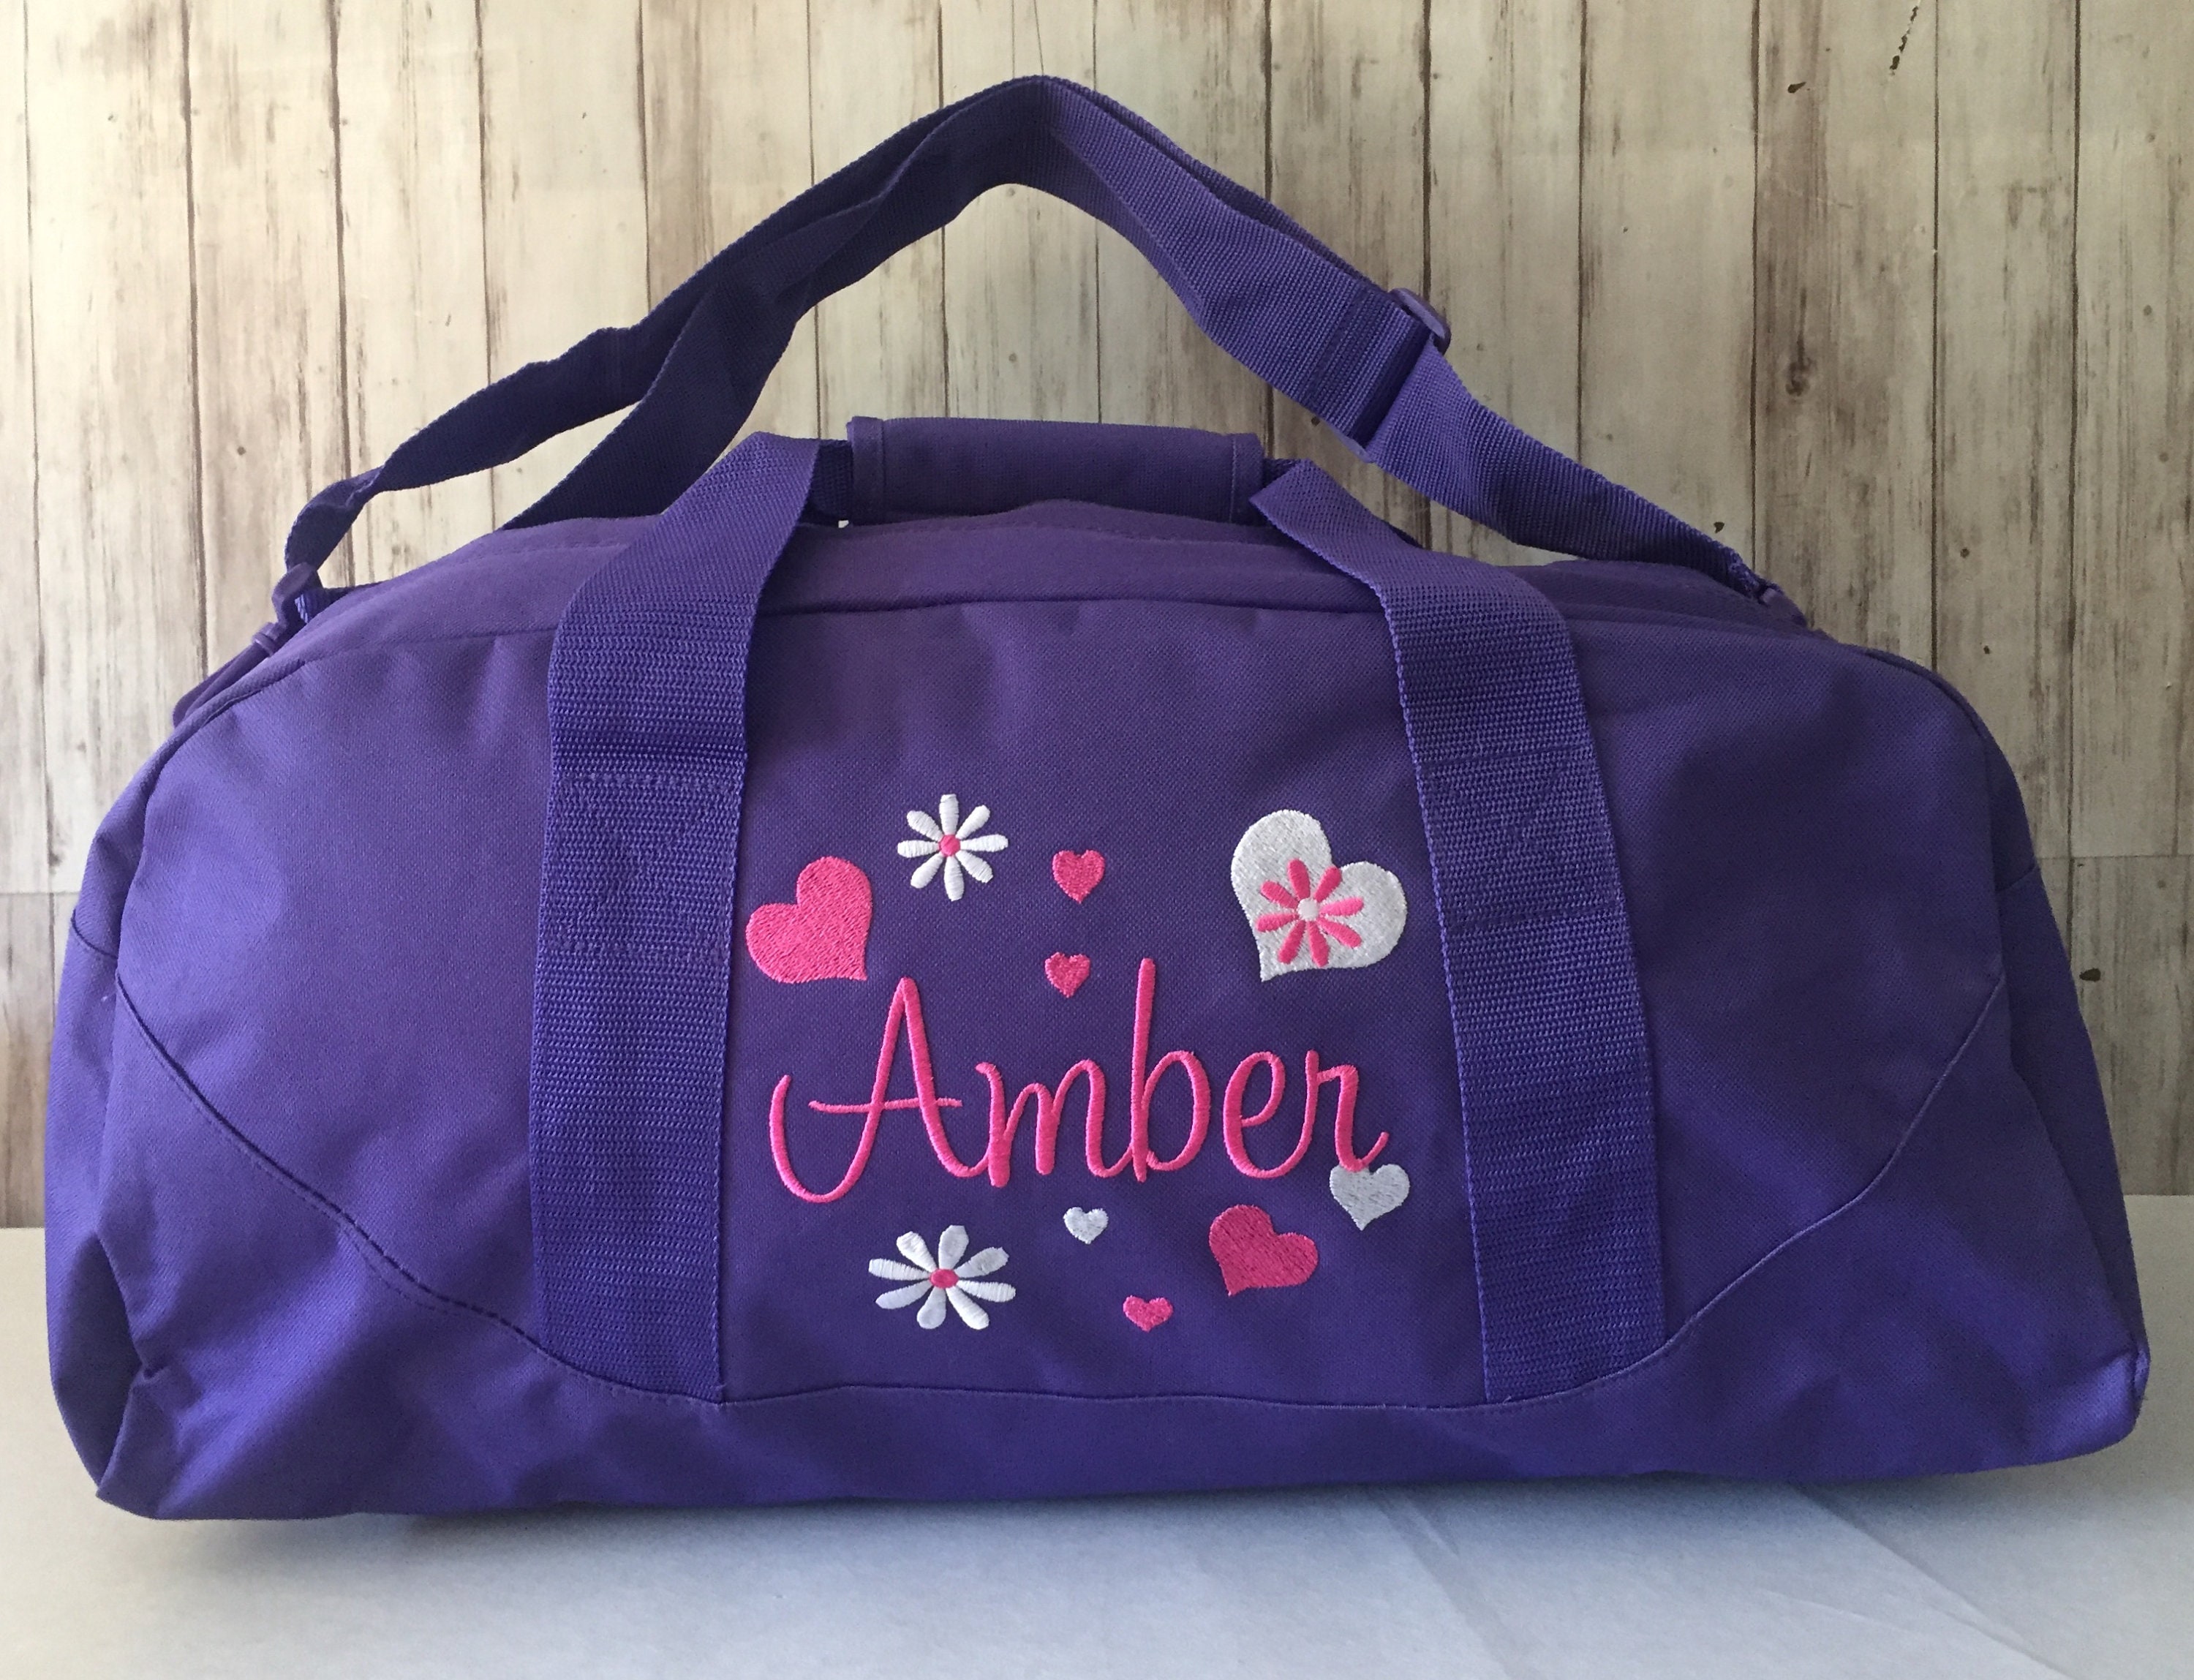 Duffle bag/Personalized Girls Duffel bag/Heart and Flowers | Etsy